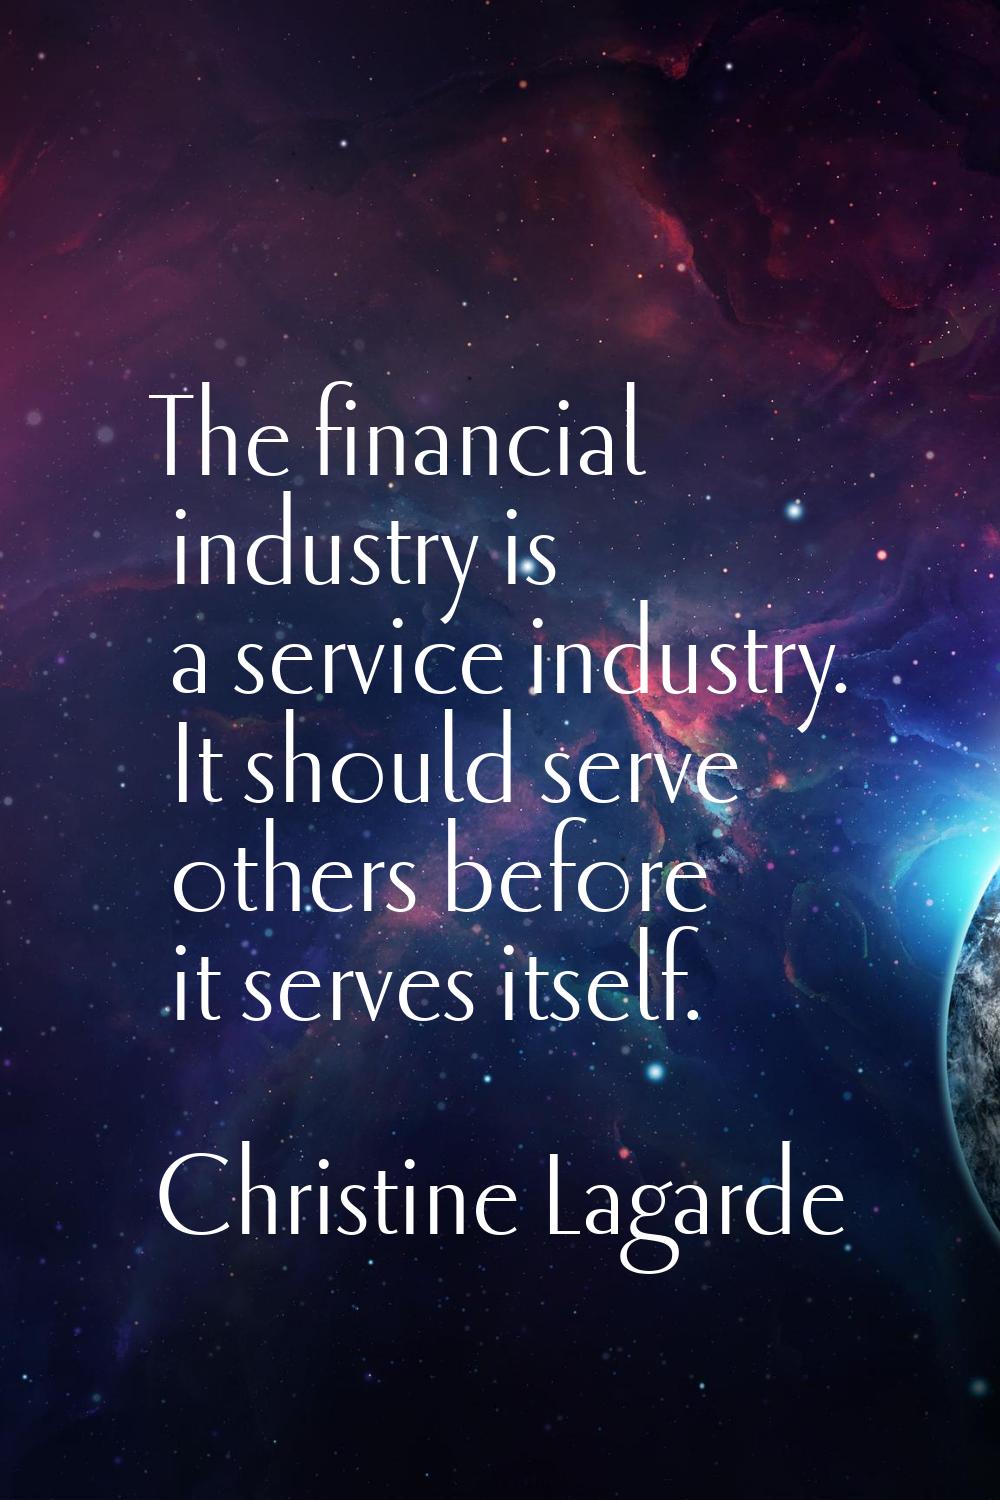 The financial industry is a service industry. It should serve others before it serves itself.